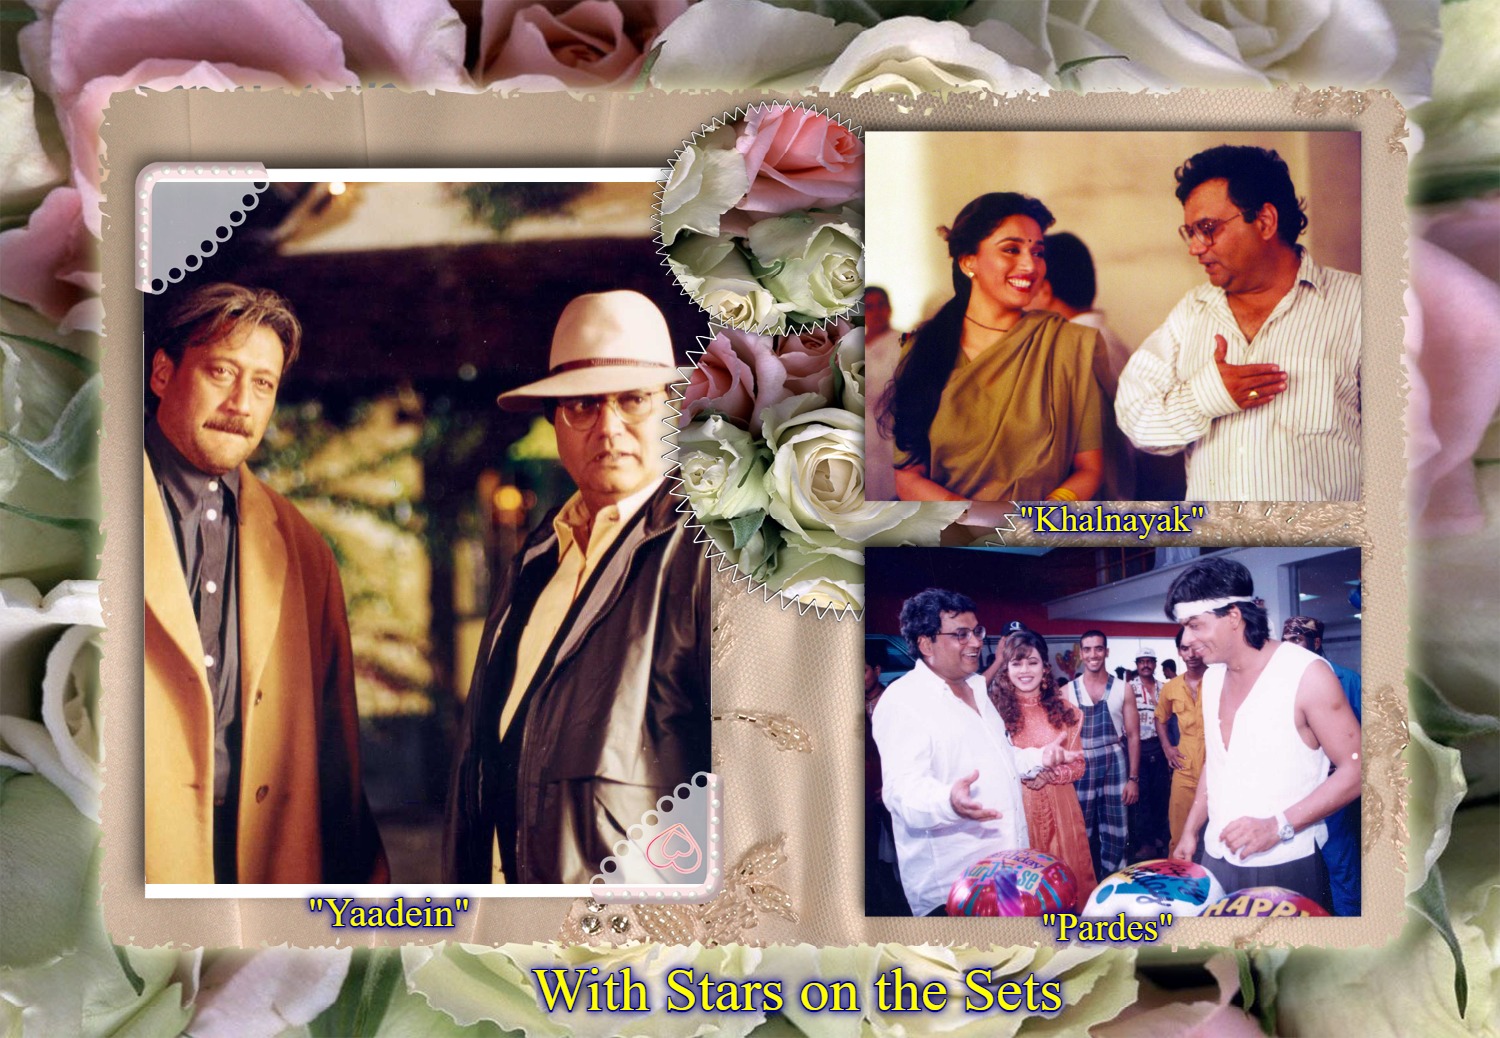 You are currently viewing “Continues To Feel His Beans – Subhash Ghai”